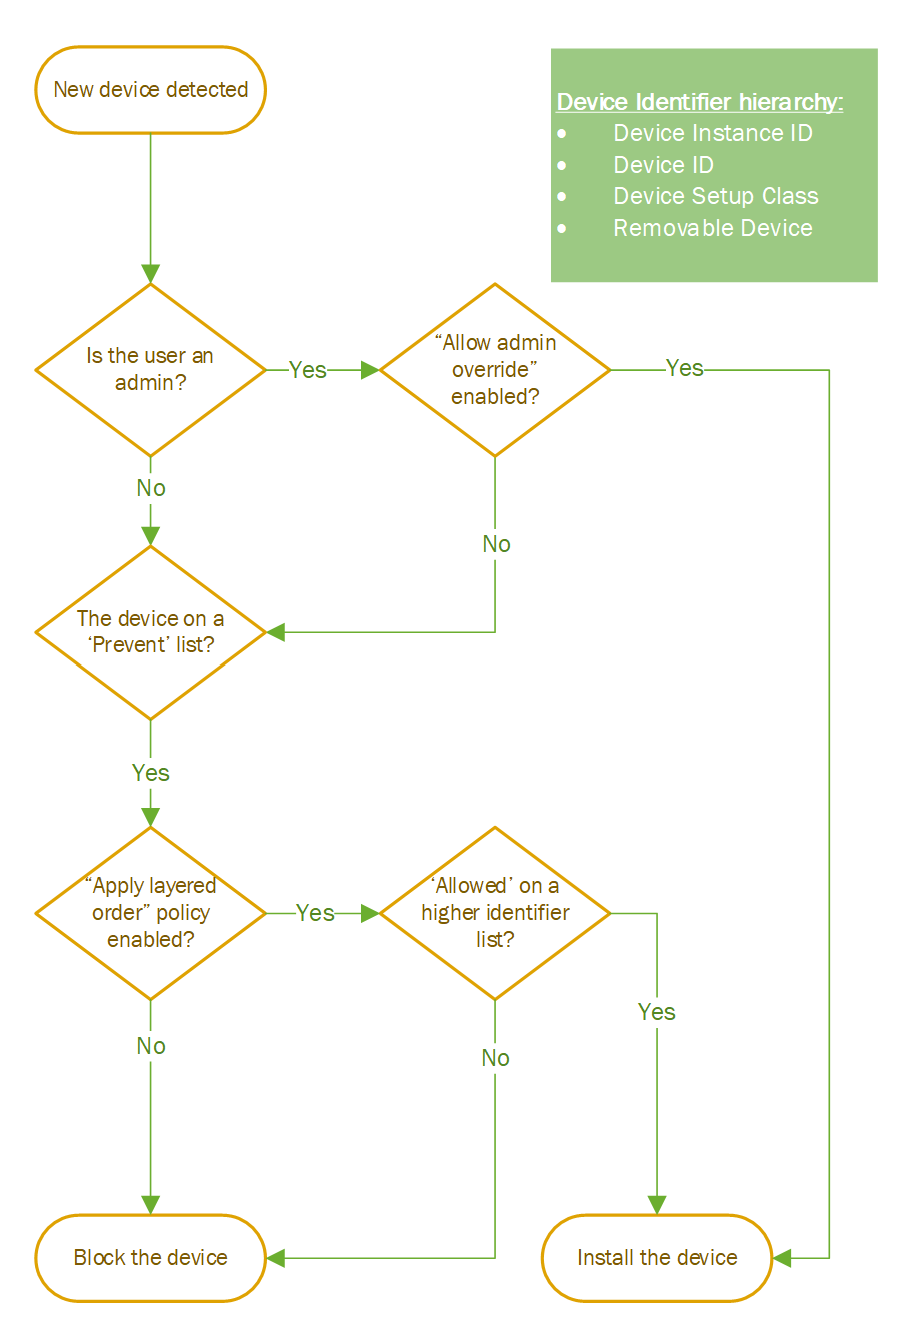 Device Installation policies flow chart.